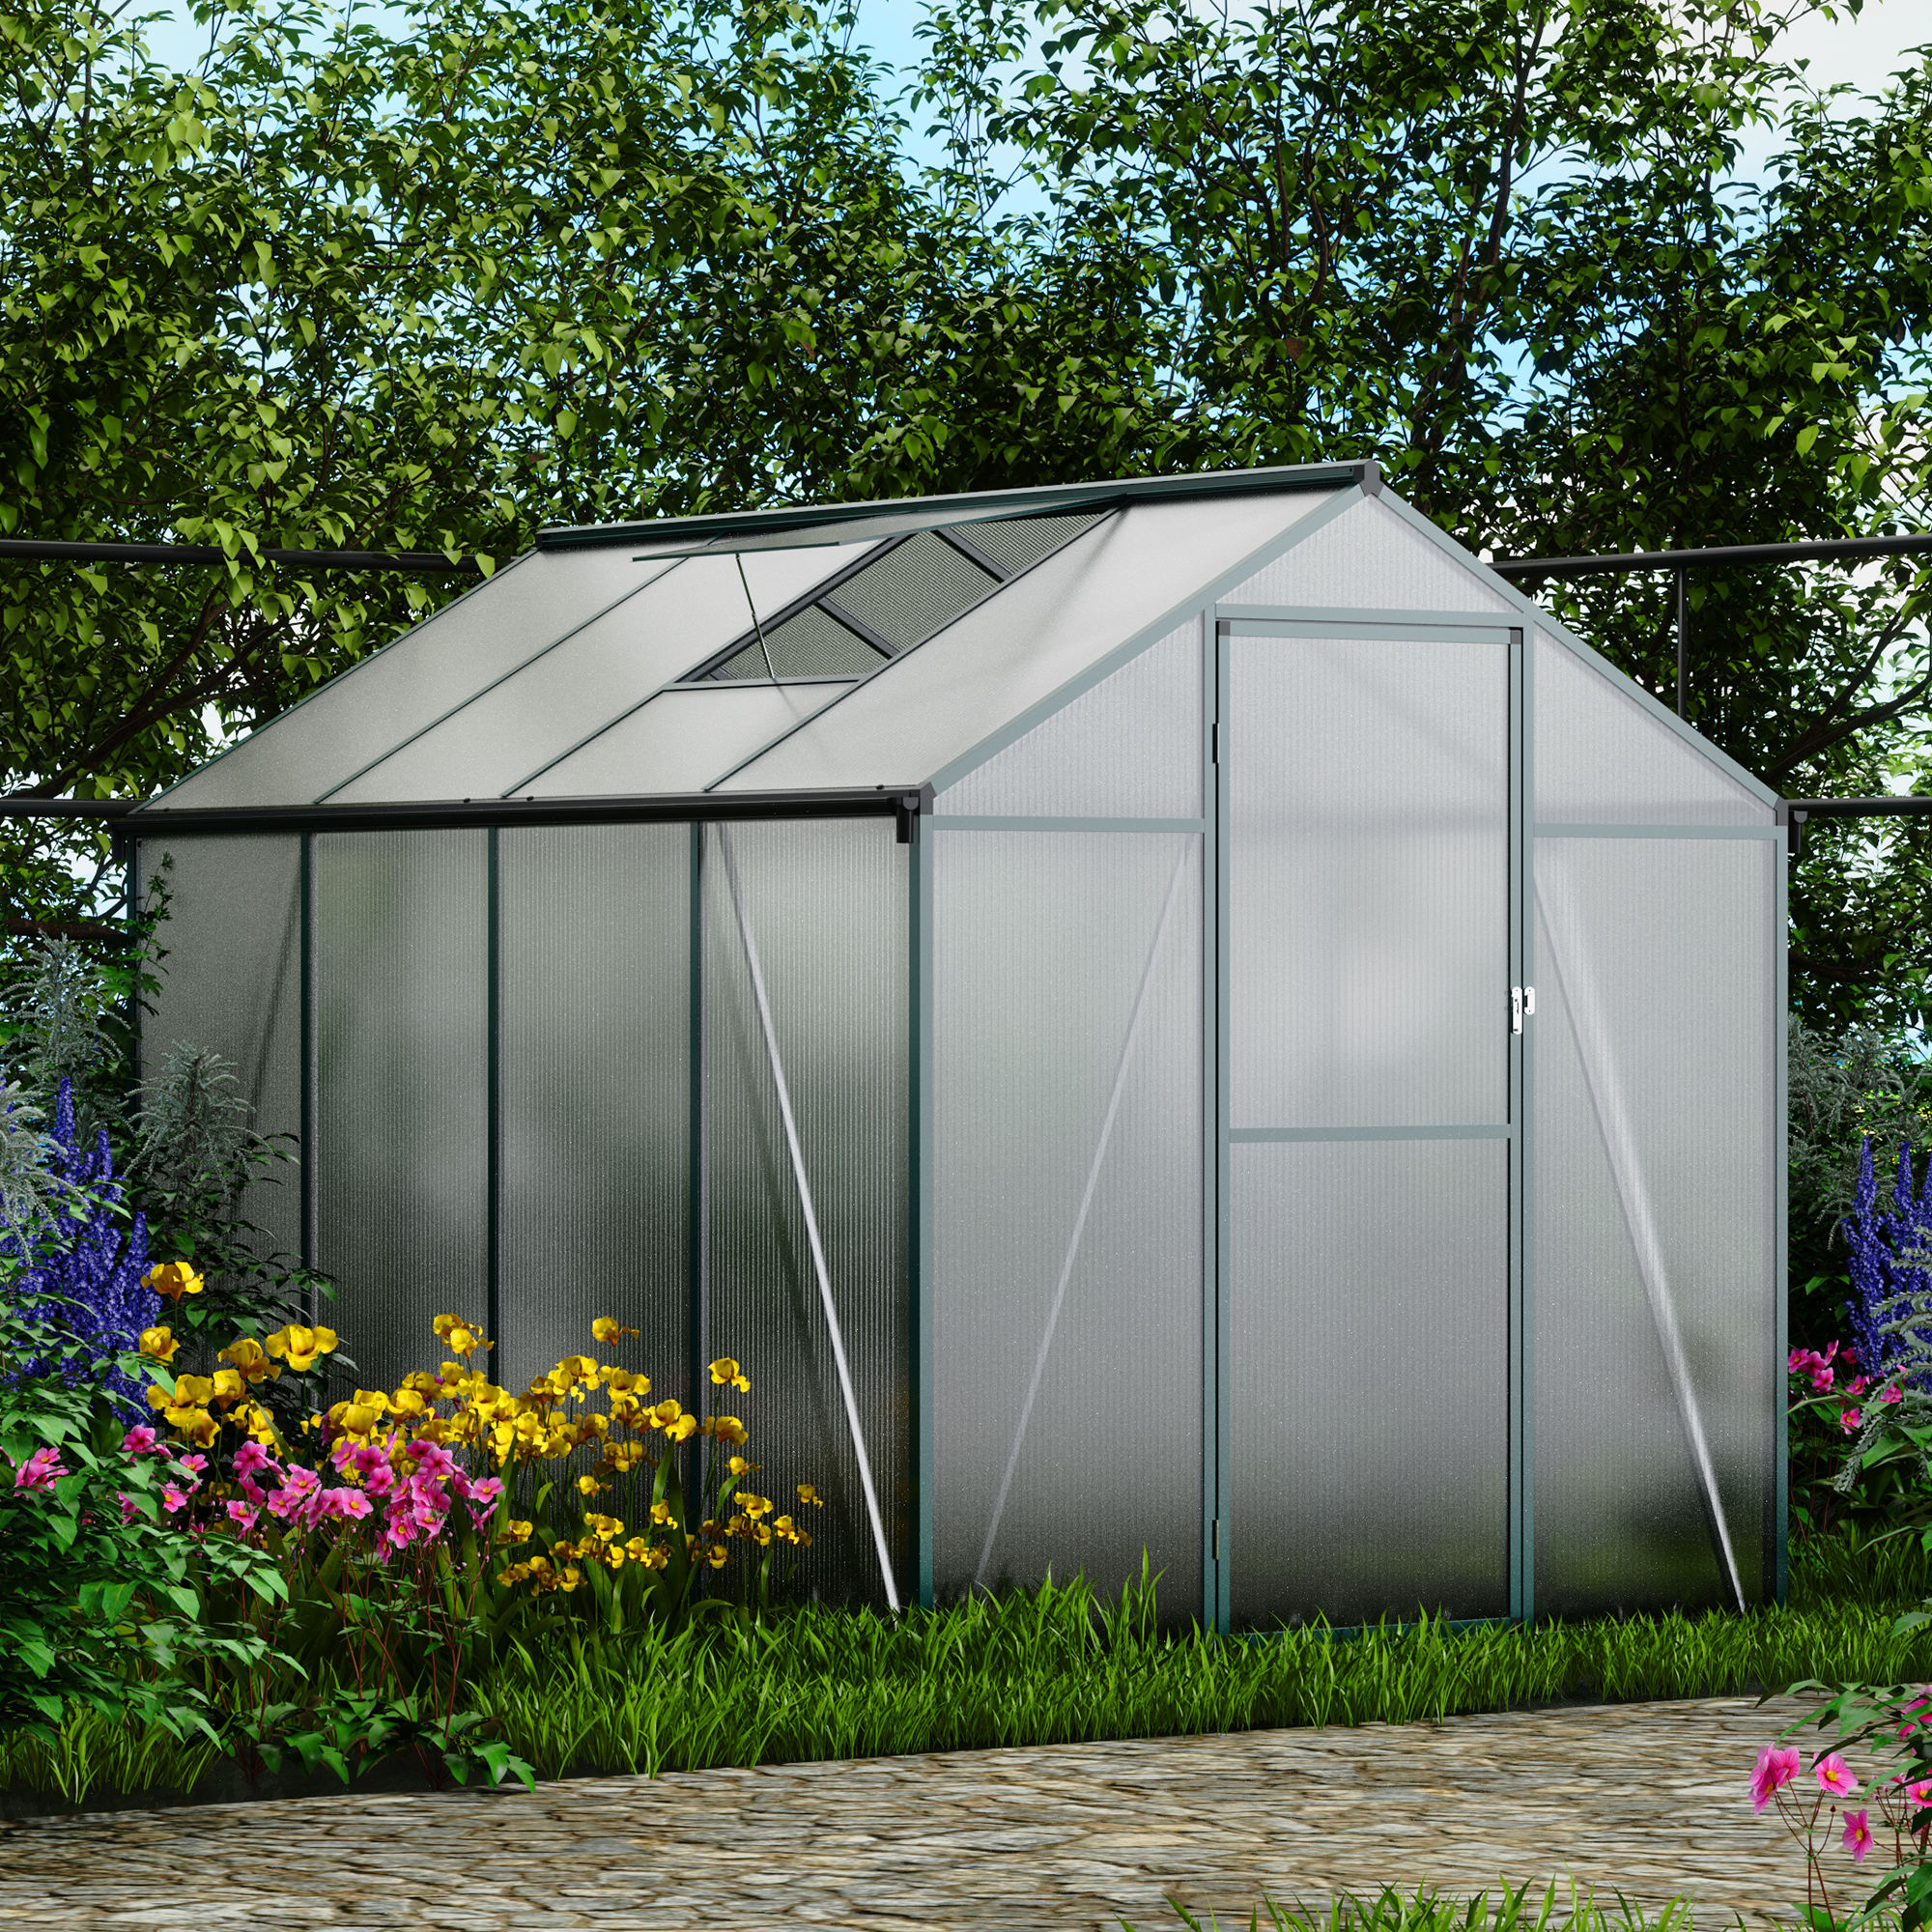 How Does a Greenhouse Work? A Comprehensive Insight into Nature's Solar-Powered Sanctuaries